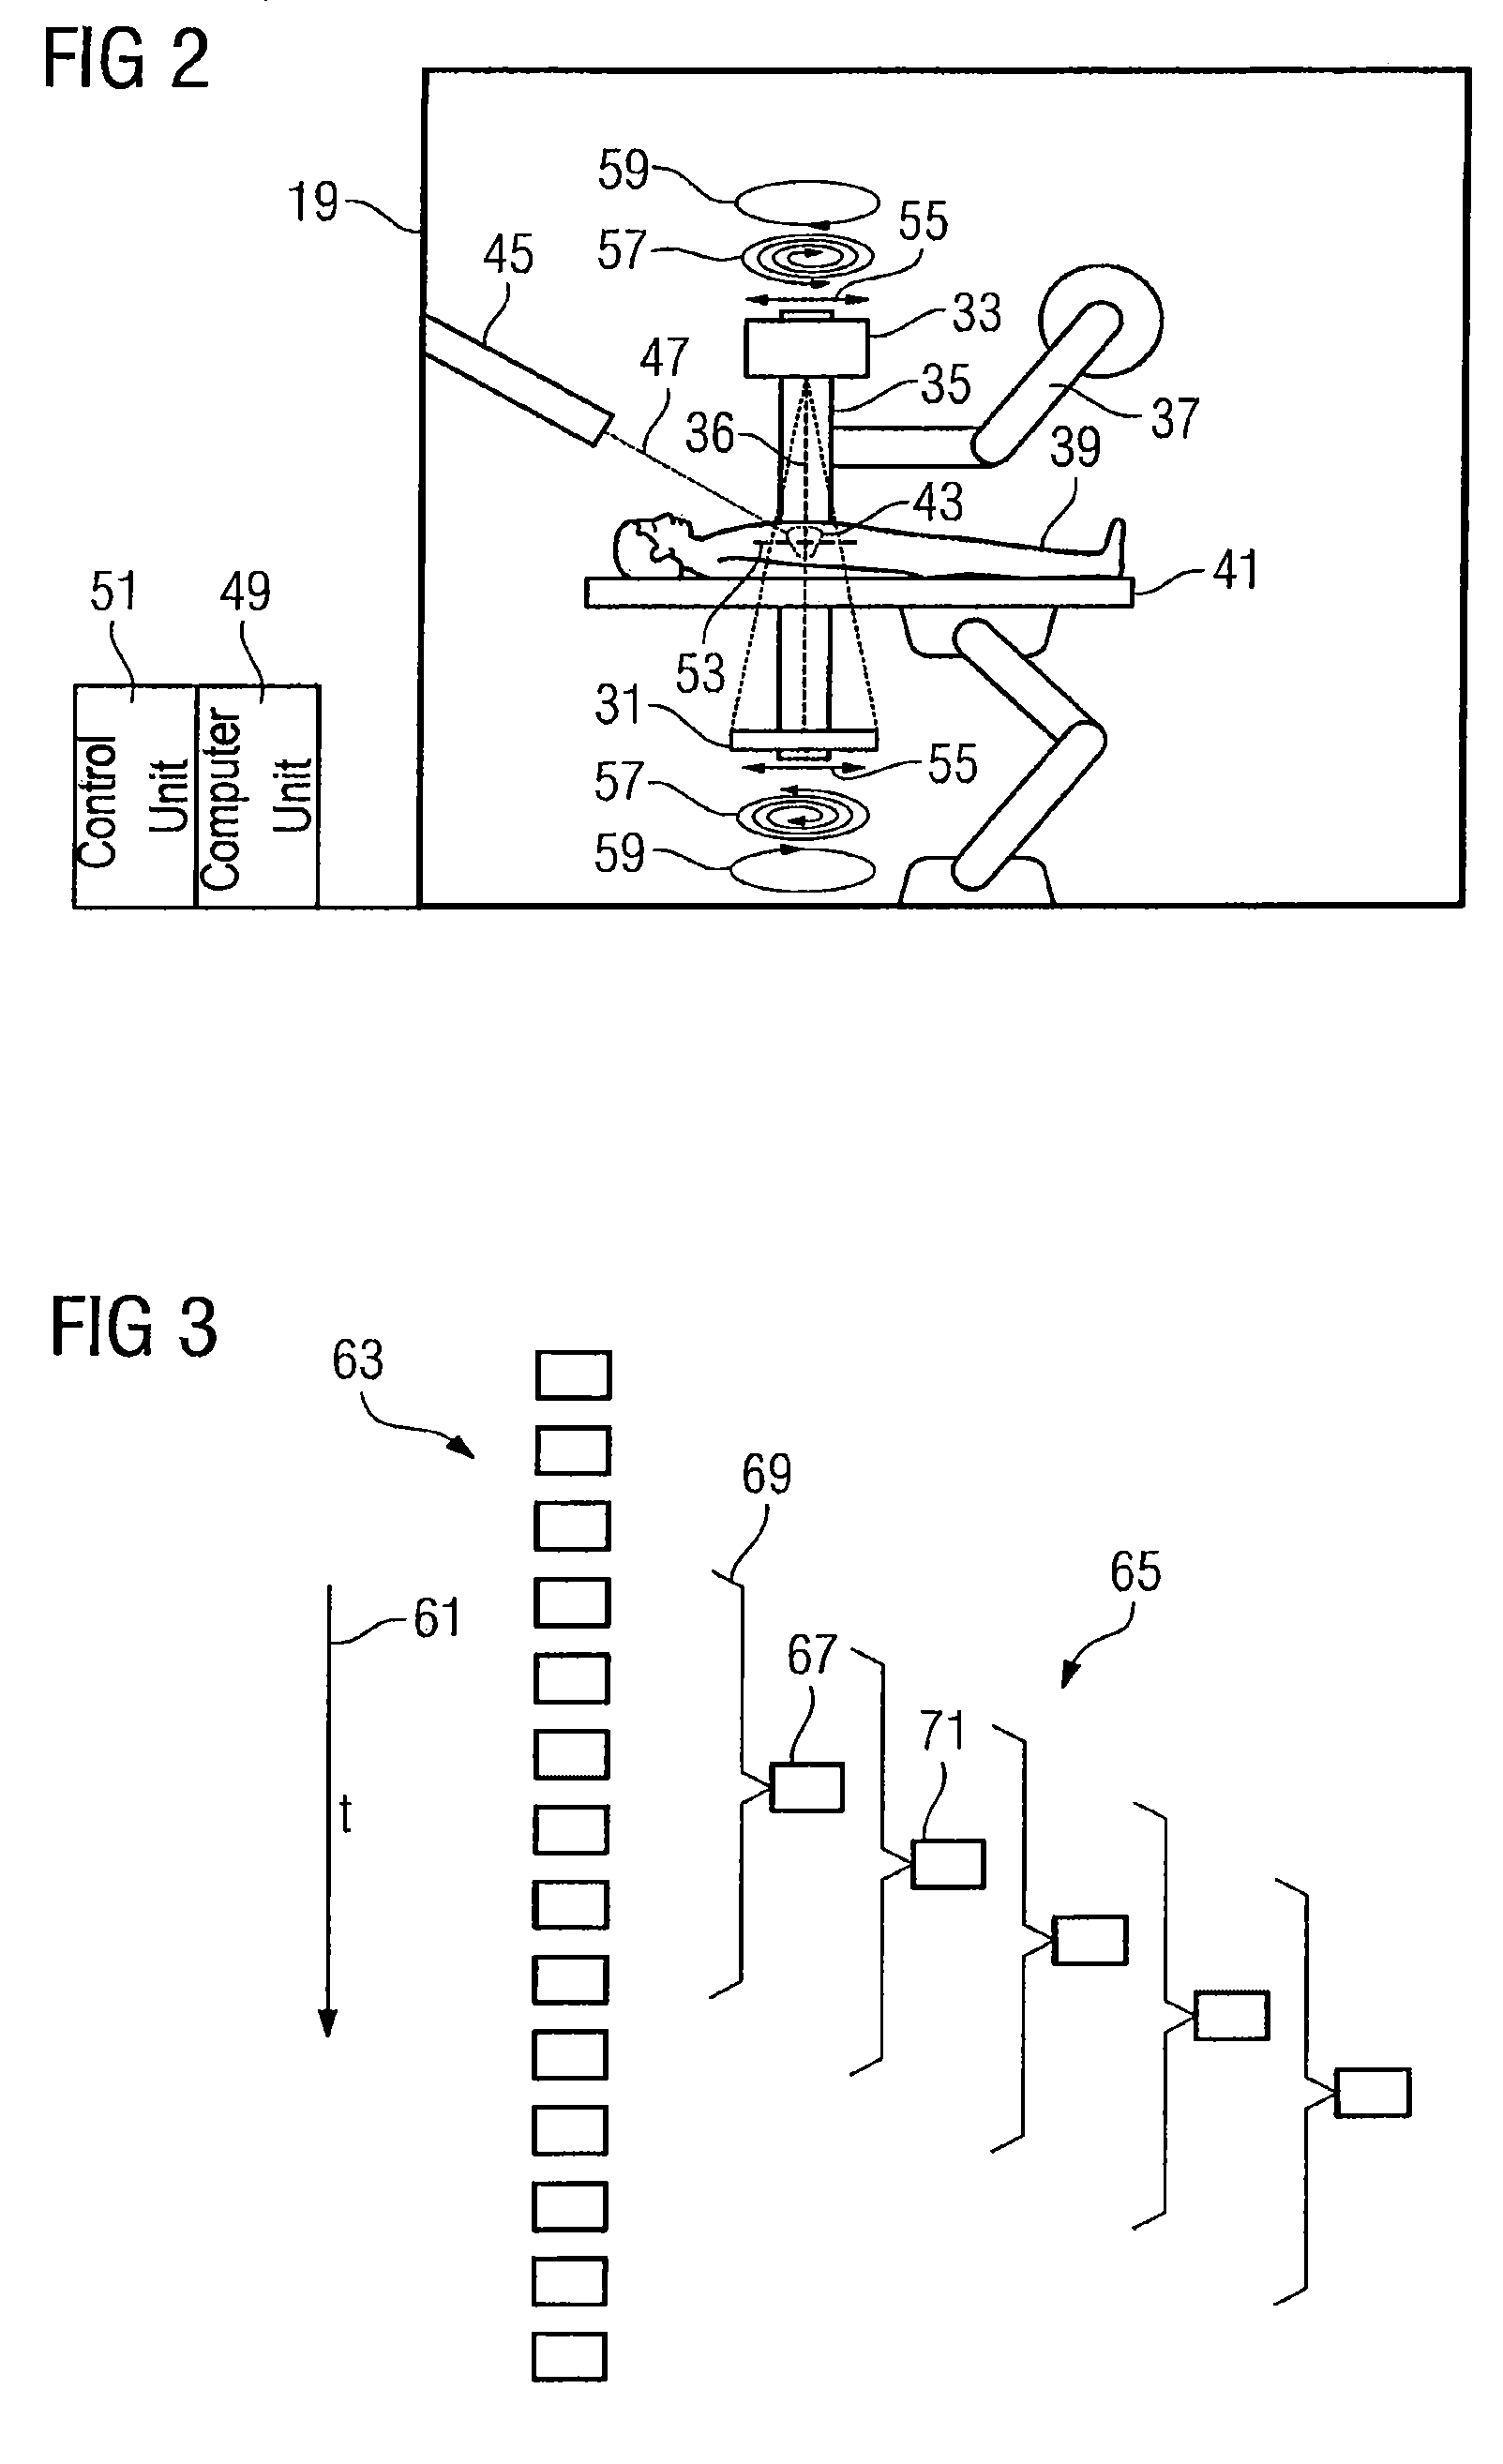 Carrying out and monitoring irradiation of a moving object